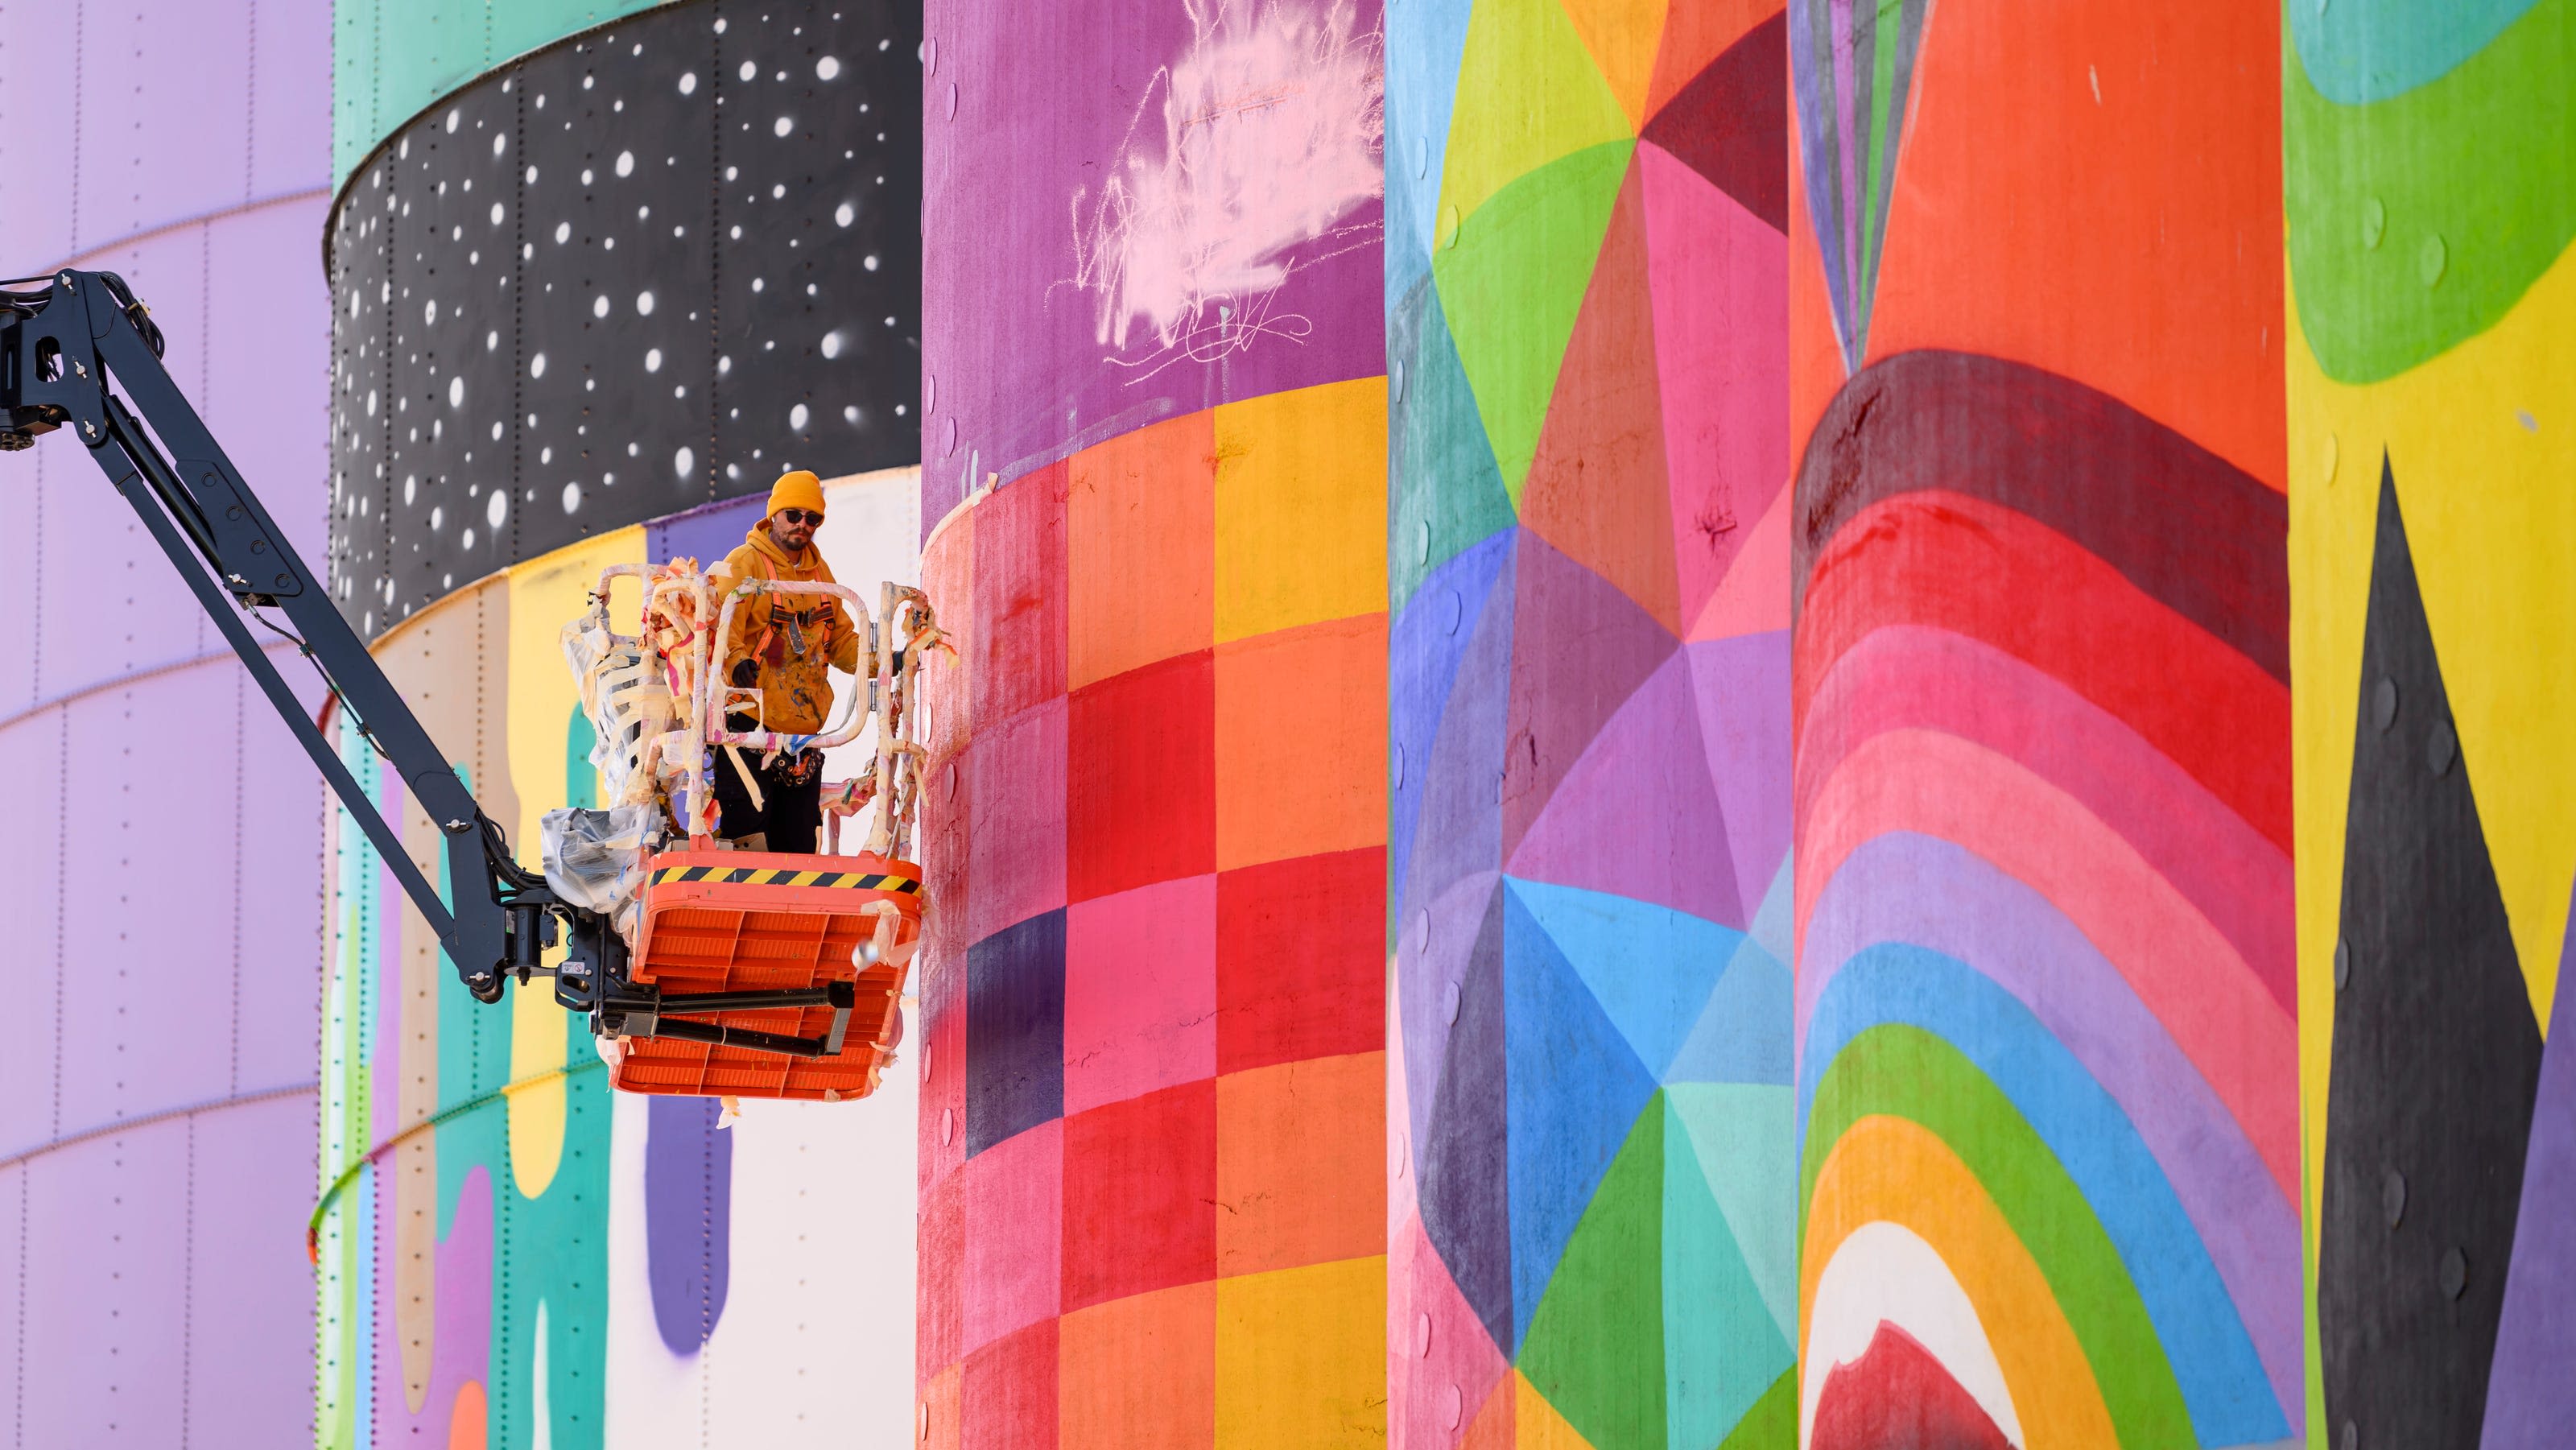 From empty silos to art: Massive mural project brings bright spot to Saginaw